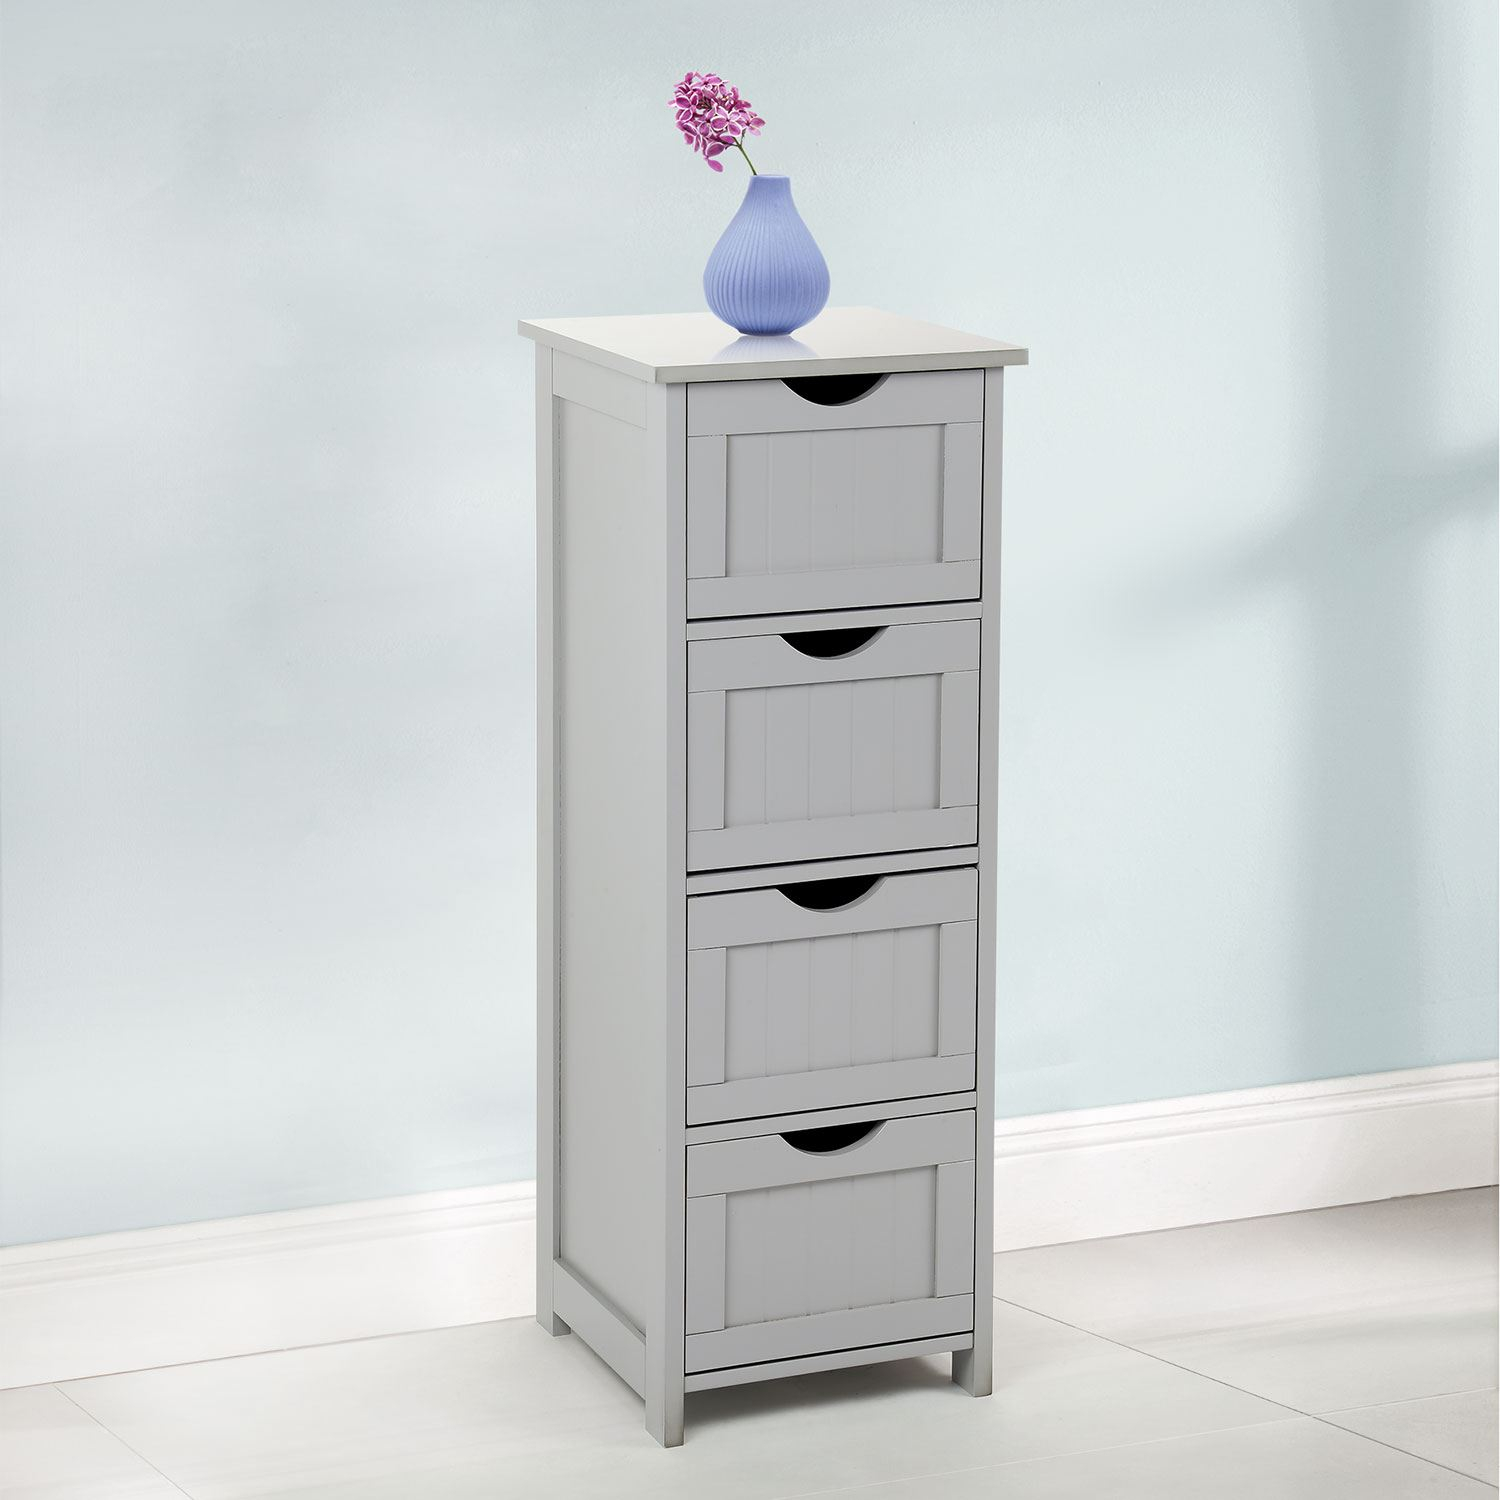 Details About 4 Drawer Slim Chest Tall Bathroom Storage Cabinet Bedroom Hallway Grey pertaining to proportions 1500 X 1500